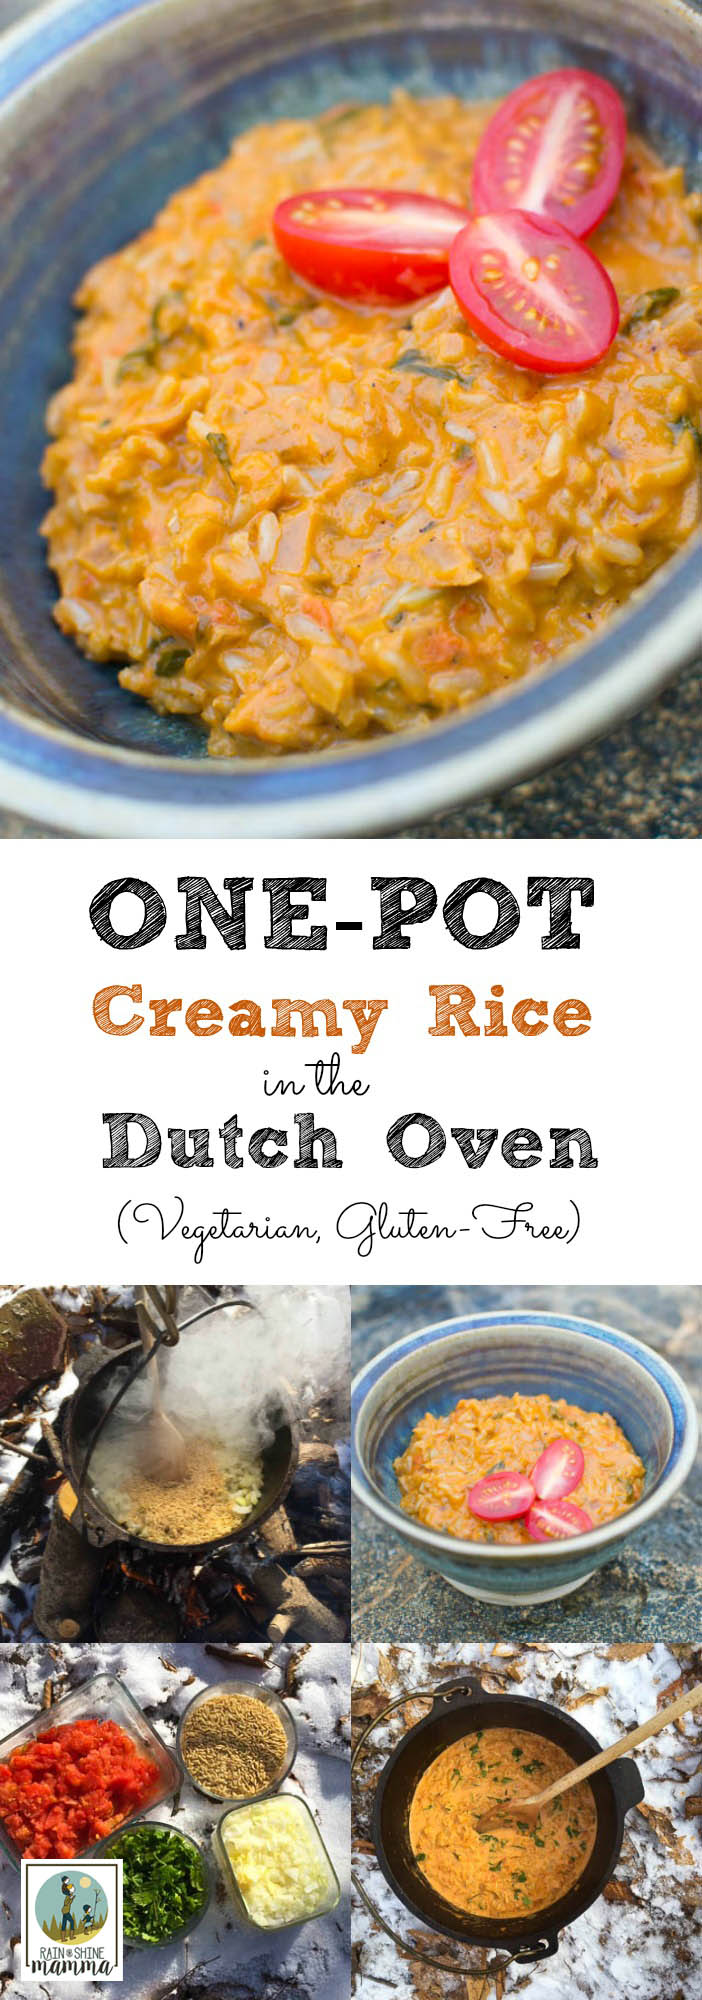 One-Pot Creamy Rice Recipe for the Dutch Oven. This healthy rice dish is perfect for lunch or dinner and is easy to cook over a campfire. An easy, vegetarian and gluten-free camping recipe for all occasions!